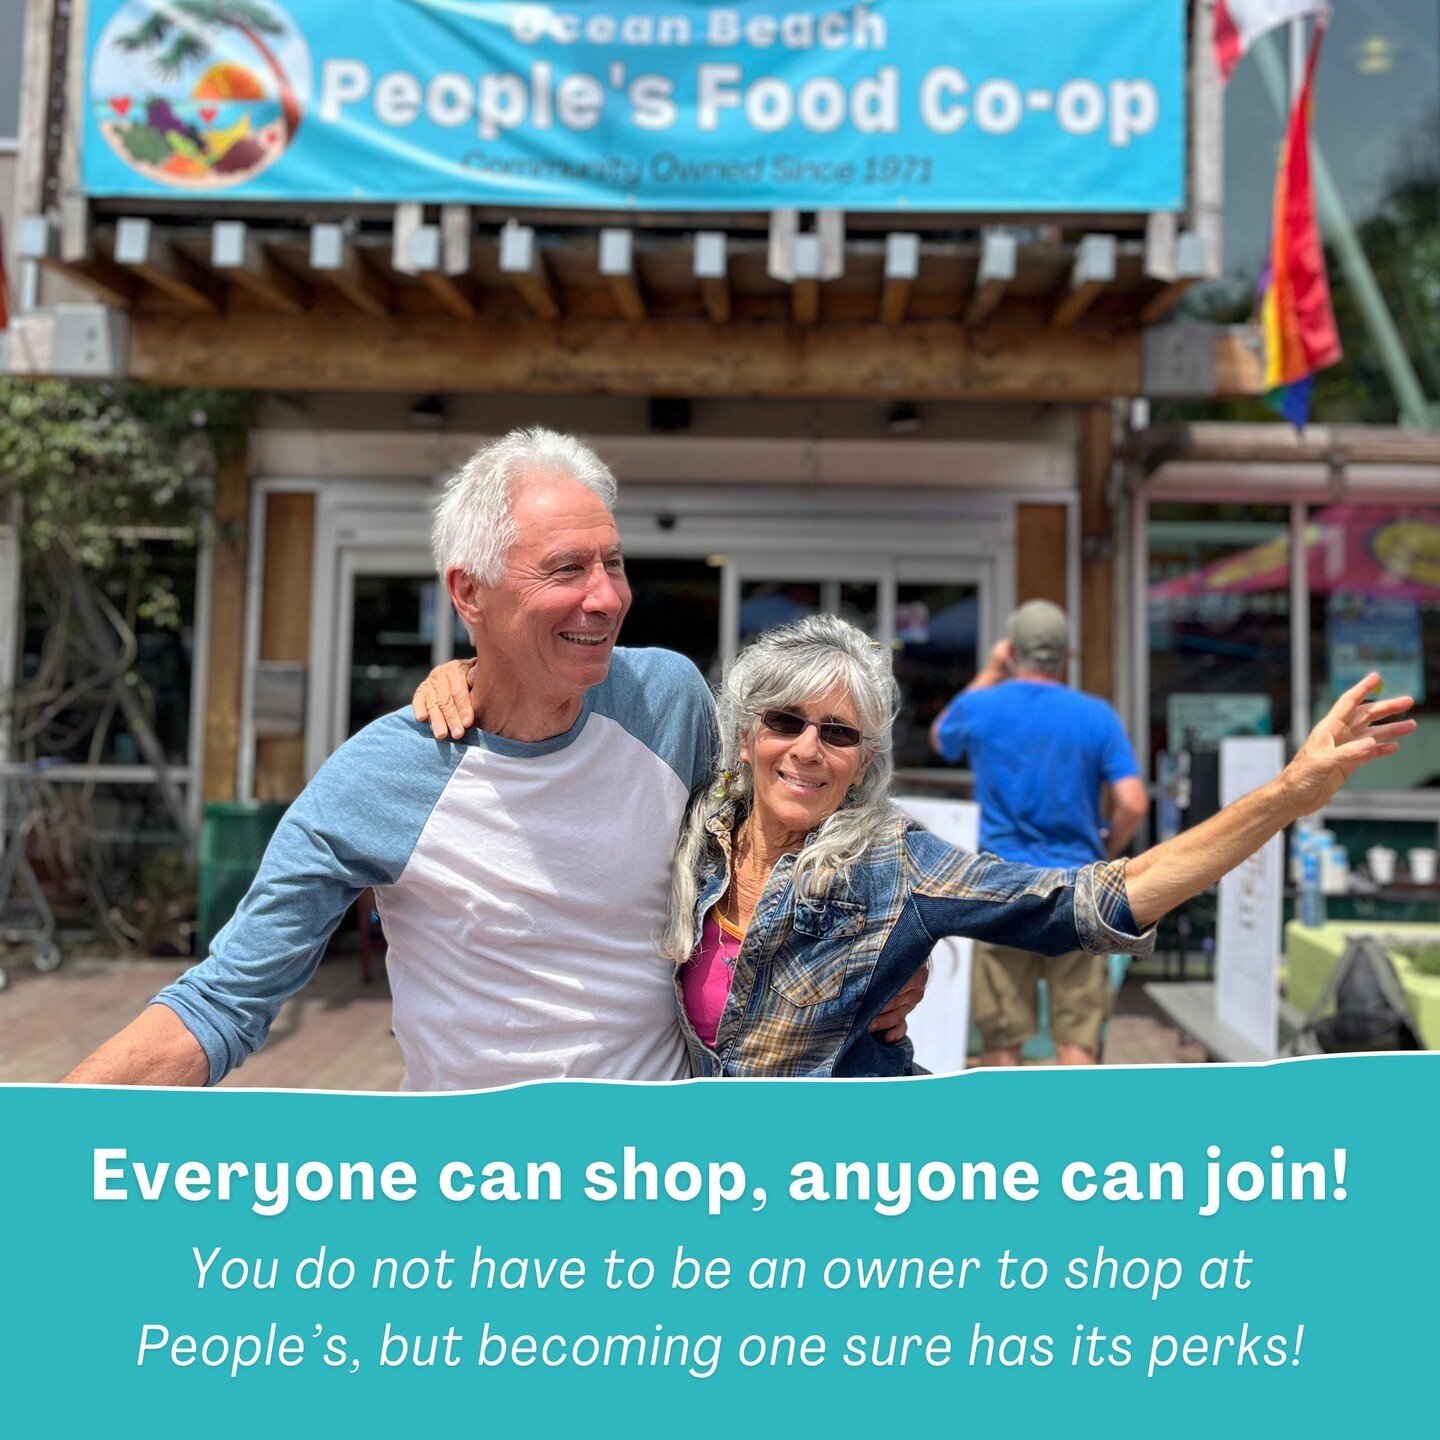 You do NOT have to be an owner/member to shop here at People's, everyone is welcome to shop &amp; eat here, and we are open daily to all from 8am - 9pm!⁠
⁠
However becoming an Owner sure has its perks! Becoming an owner at People's is:⁠
✅️ affordable